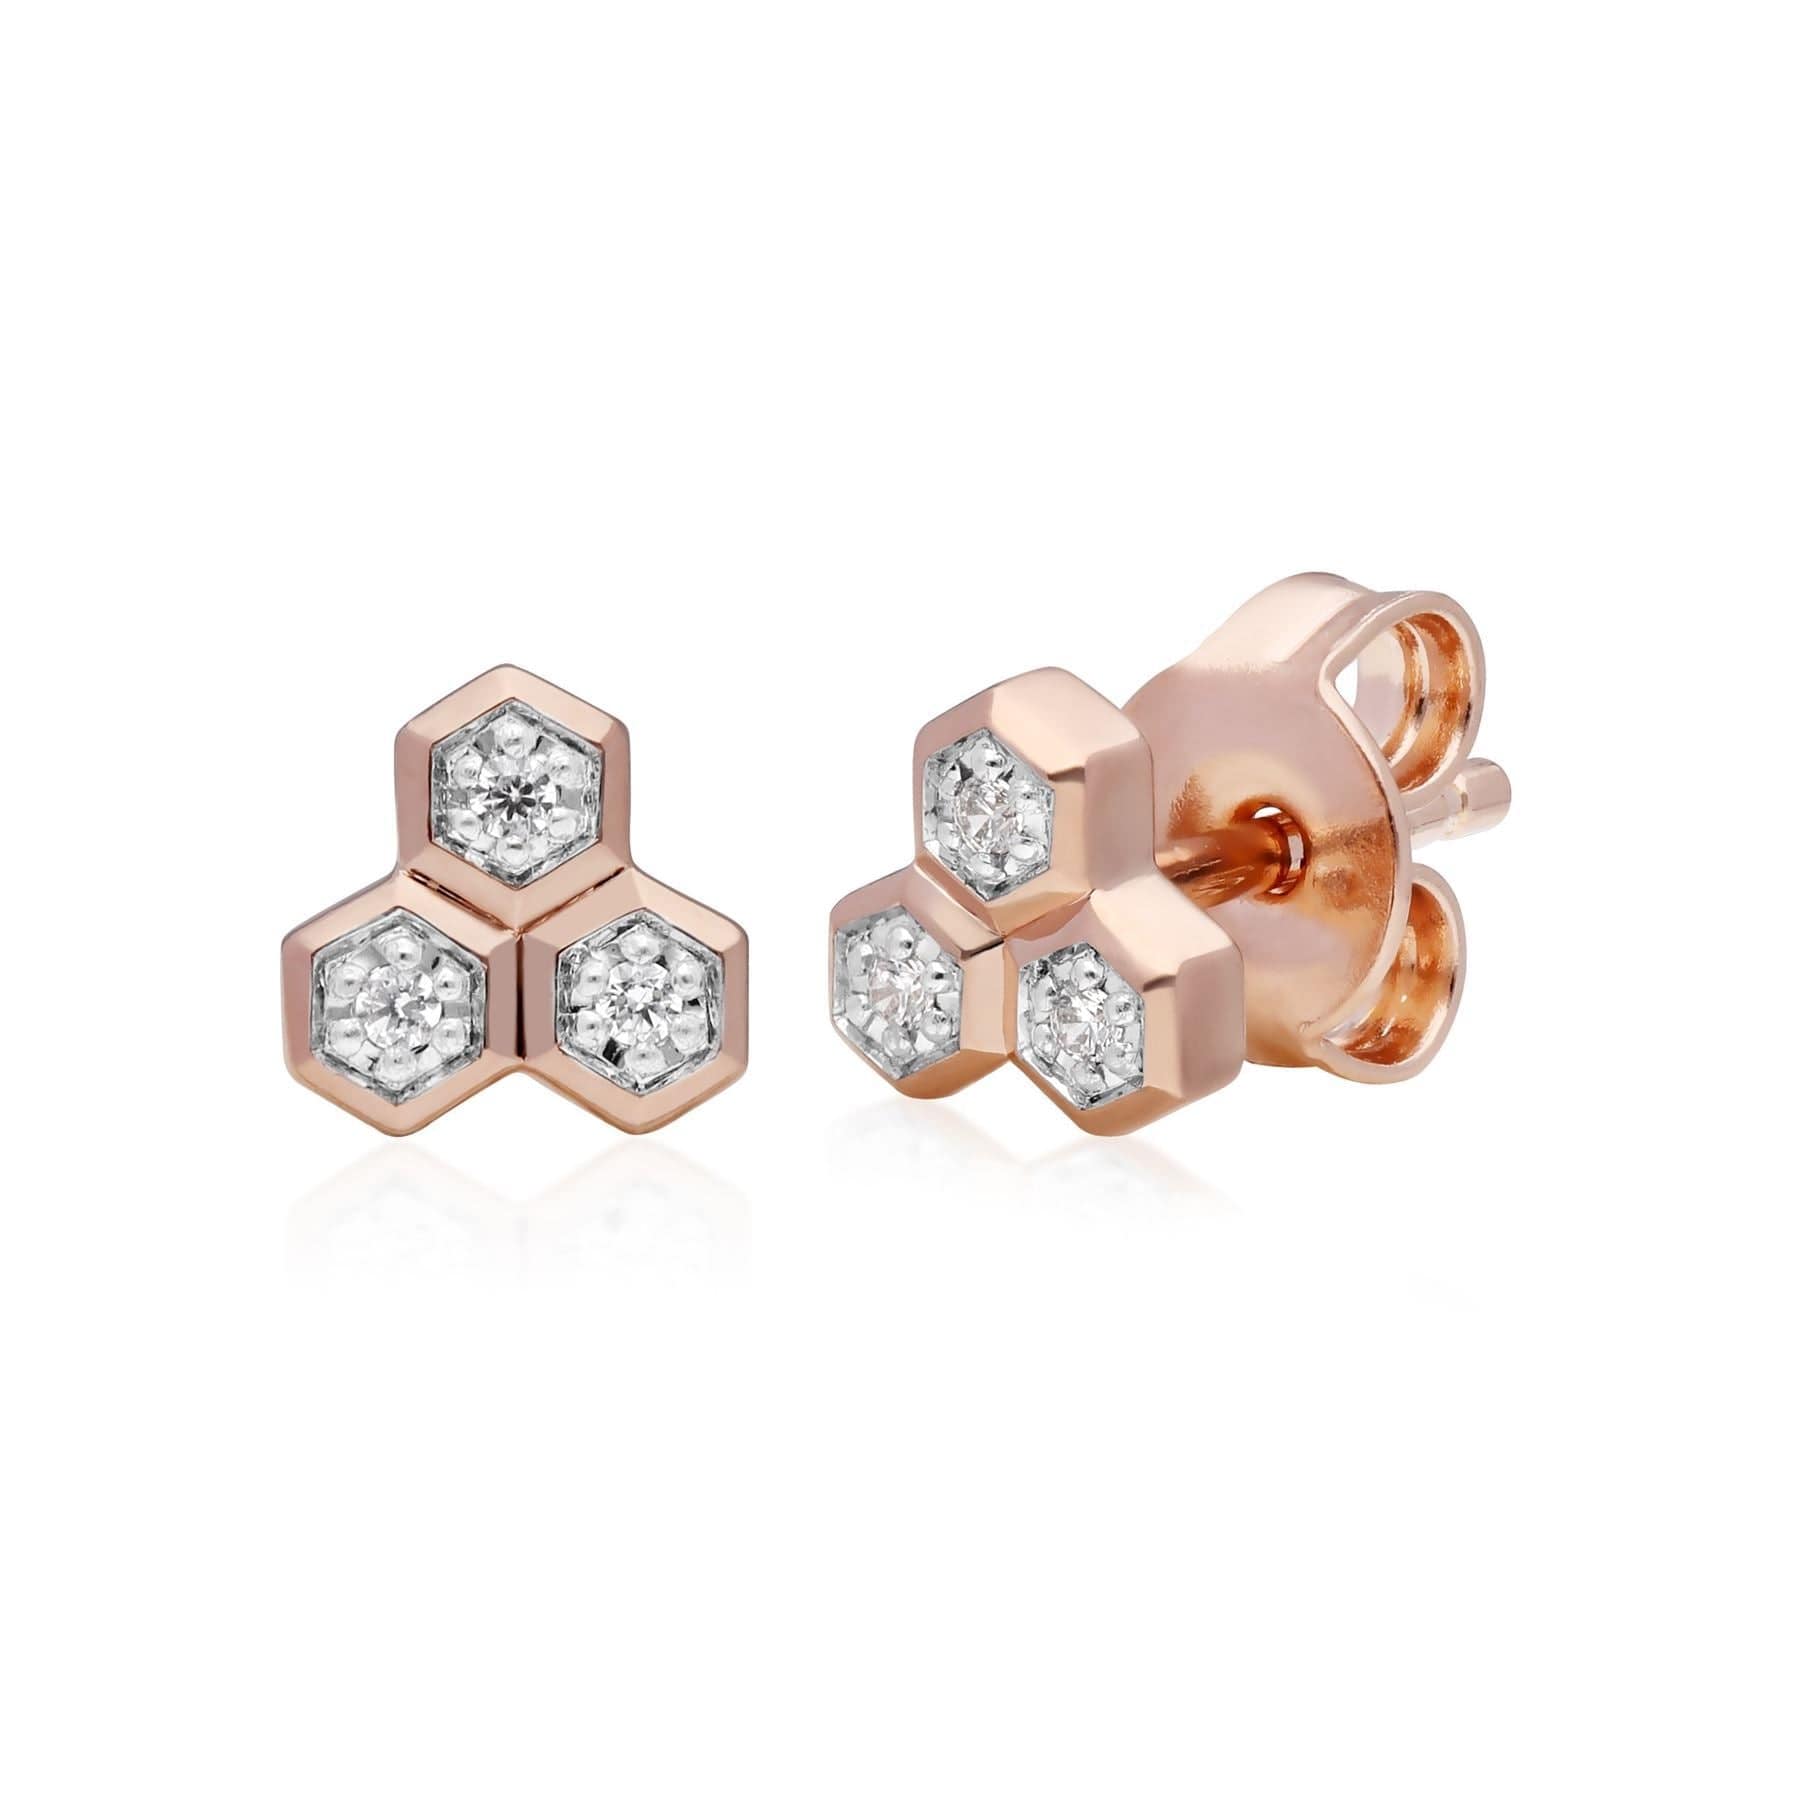 191N0227029-191E0394029 Diamond Trilogy Necklace & Stud Earring Set in 9ct Rose Gold 3